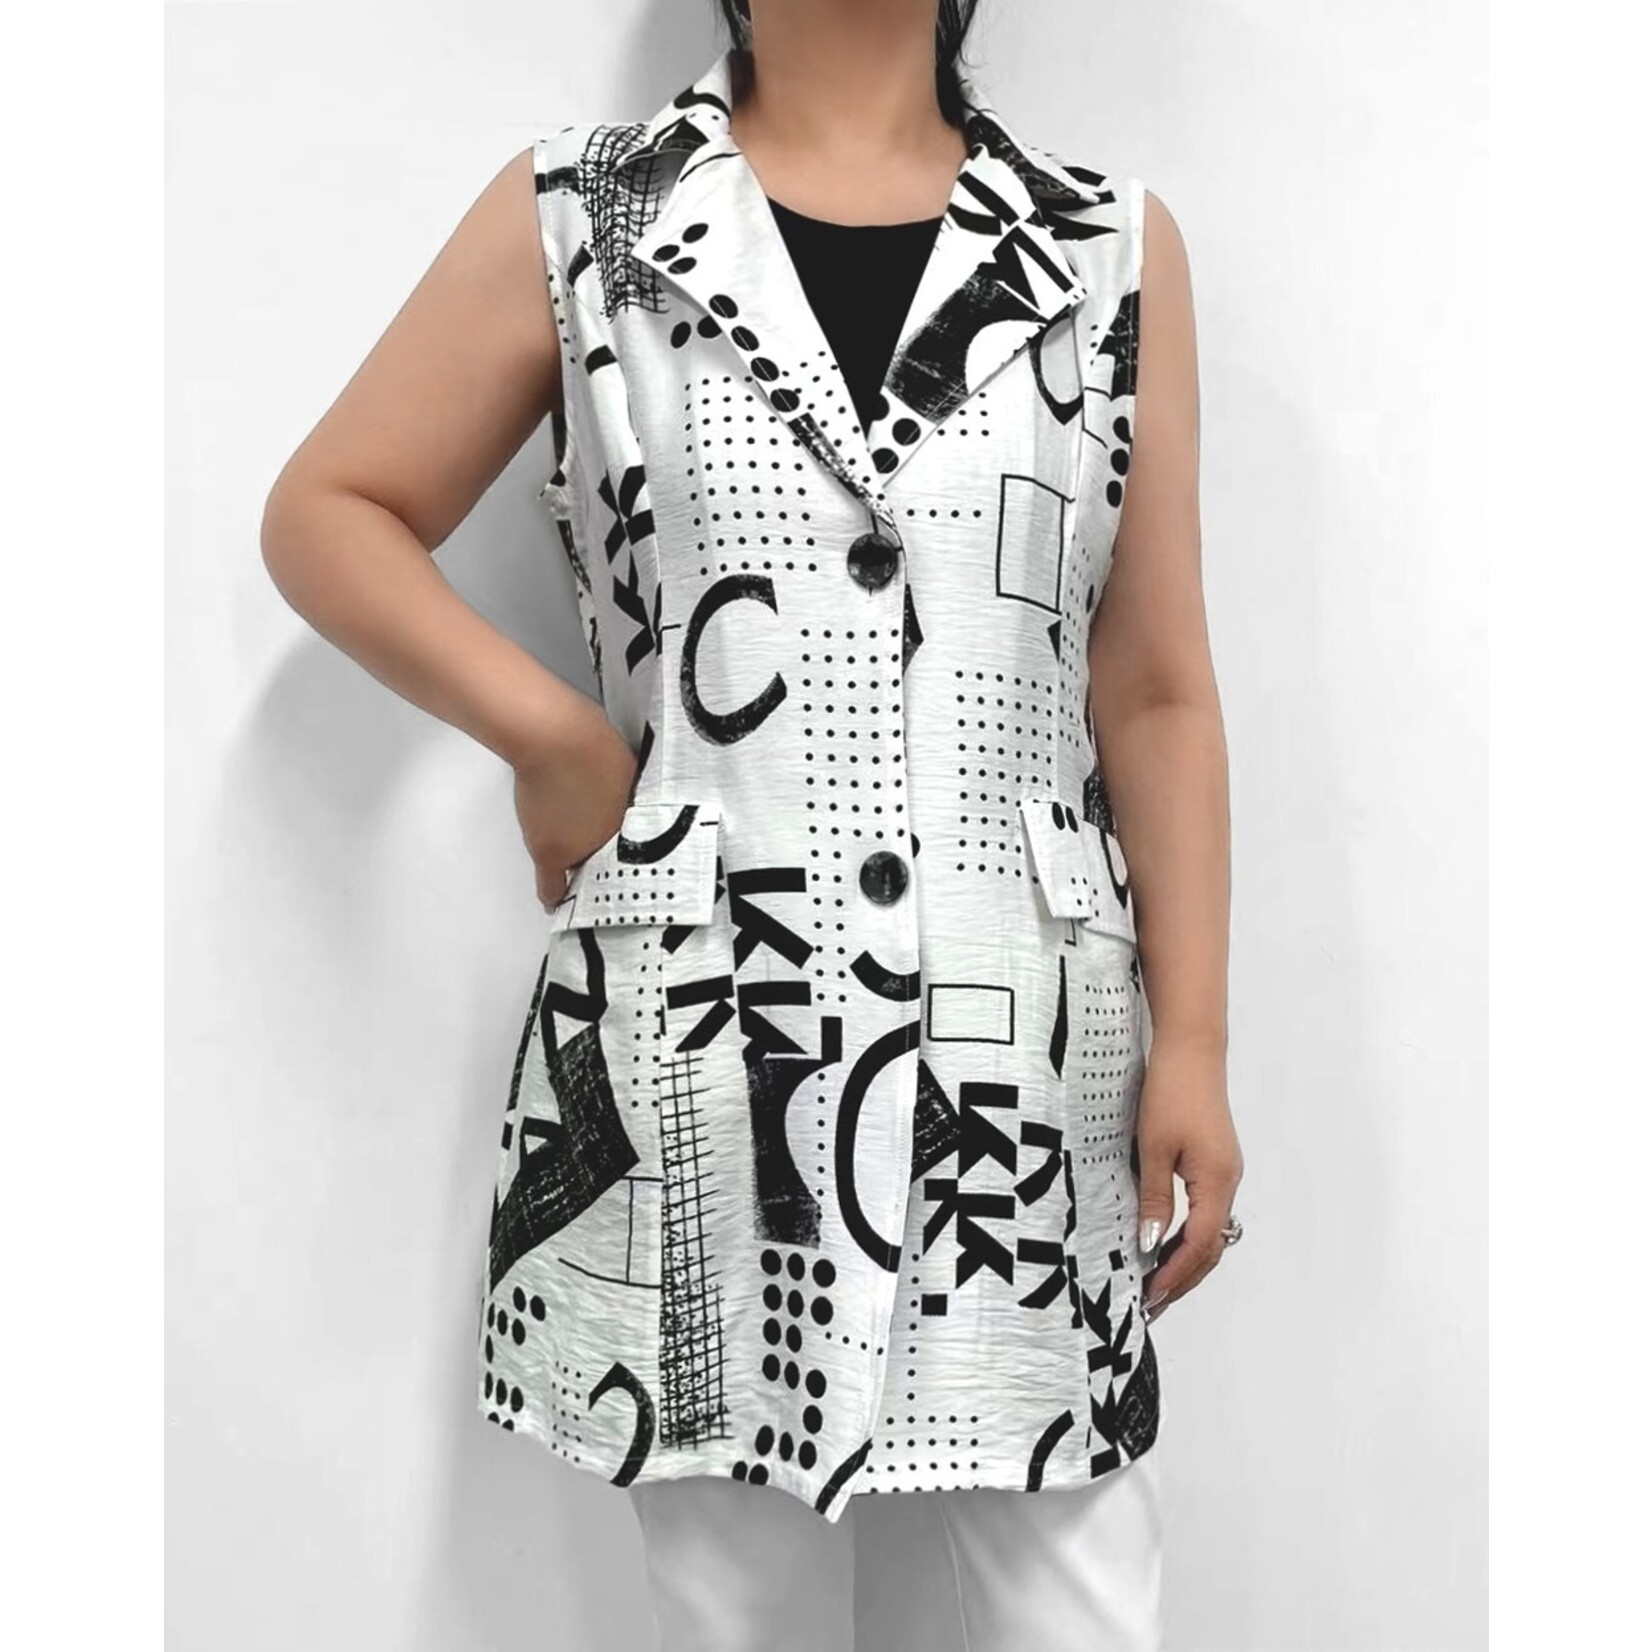 Creations printed long button top vest with front pockets, tops, vests